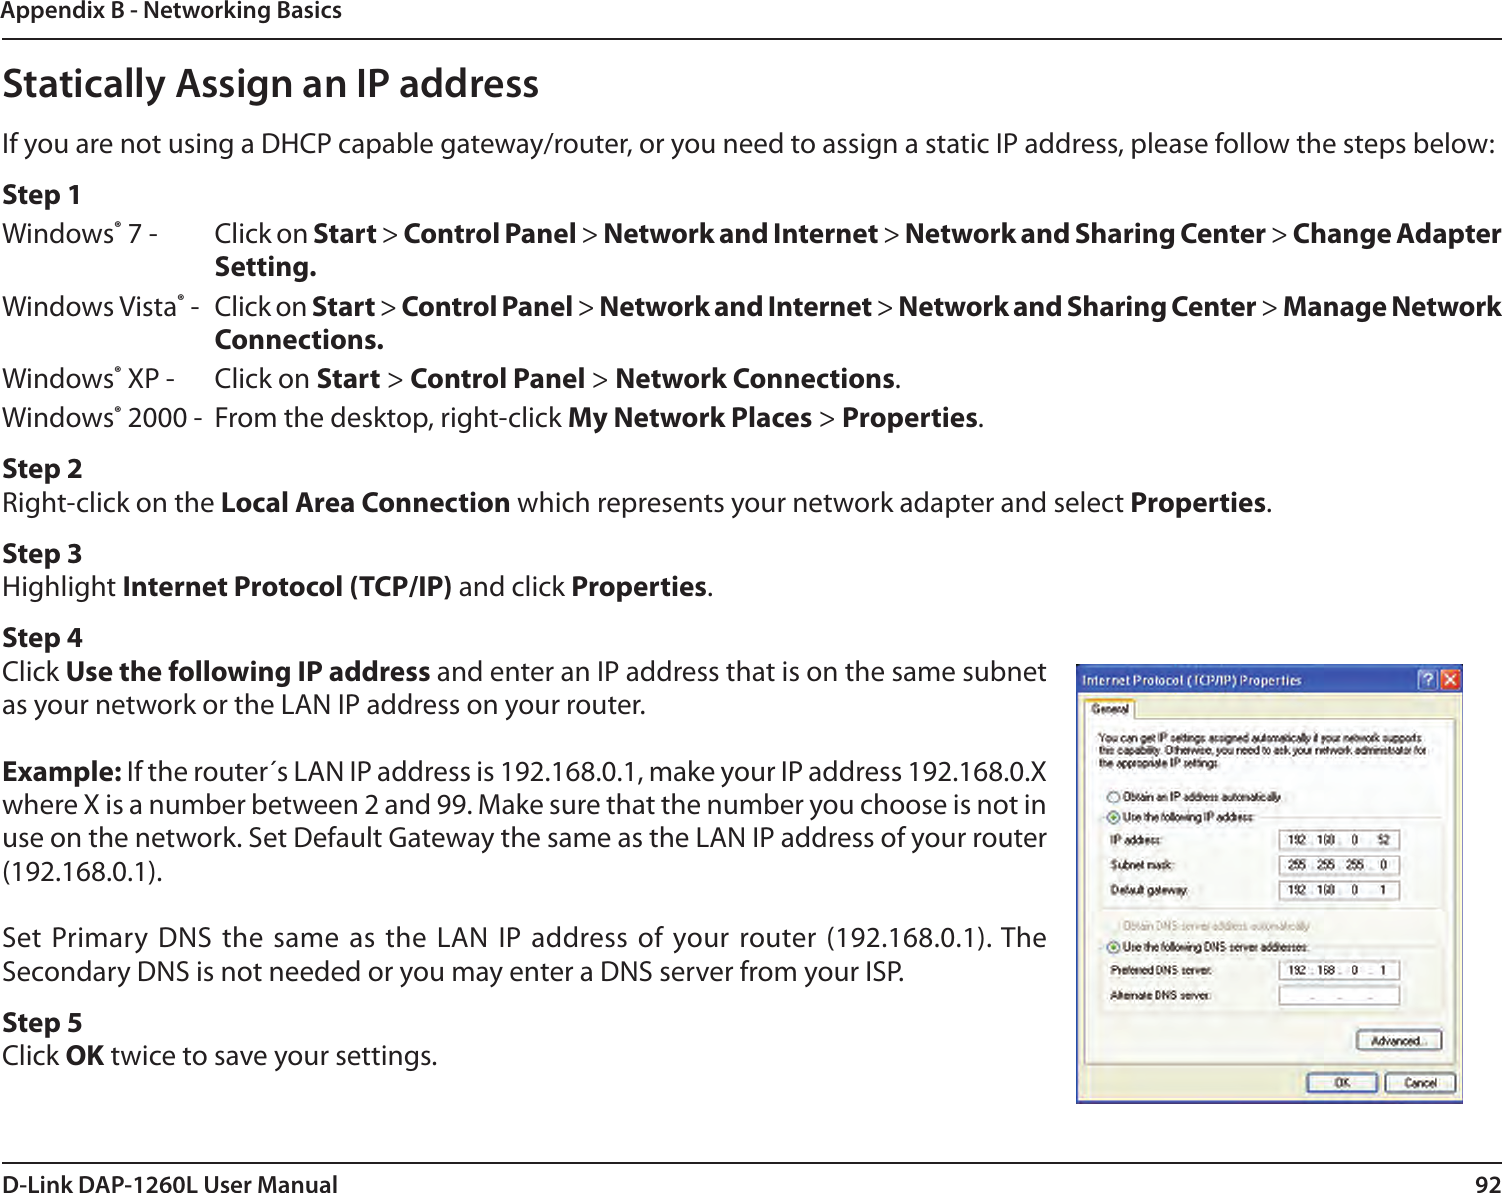 92D-Link DAP-1260L User ManualAppendix B - Networking BasicsStatically Assign an IP addressIf you are not using a DHCP capable gateway/router, or you need to assign a static IP address, please follow the steps below:Step 1Windows® 7 -  Click on Start &gt; Control Panel &gt; Network and Internet &gt; Network and Sharing Center &gt; Change Adapter Setting. Windows Vista® -  Click on Start &gt; Control Panel &gt; Network and Internet &gt; Network and Sharing Center &gt; Manage Network Connections.Windows® XP -  Click on Start &gt; Control Panel &gt; Network Connections.Windows® 2000 -  From the desktop, right-click My Network Places &gt; Properties.Step 2Right-click on the Local Area Connection which represents your network adapter and select Properties.Step 3Highlight Internet Protocol (TCP/IP) and click Properties.Step 4Click Use the following IP address and enter an IP address that is on the same subnet as your network or the LAN IP address on your router.Example: If the router´s LAN IP address is 192.168.0.1, make your IP address 192.168.0.X where X is a number between 2 and 99. Make sure that the number you choose is not in use on the network. Set Default Gateway the same as the LAN IP address of your router (192.168.0.1). Set Primary DNS the  same as the LAN  IP address of your router (192.168.0.1). The Secondary DNS is not needed or you may enter a DNS server from your ISP.Step 5Click OK twice to save your settings.